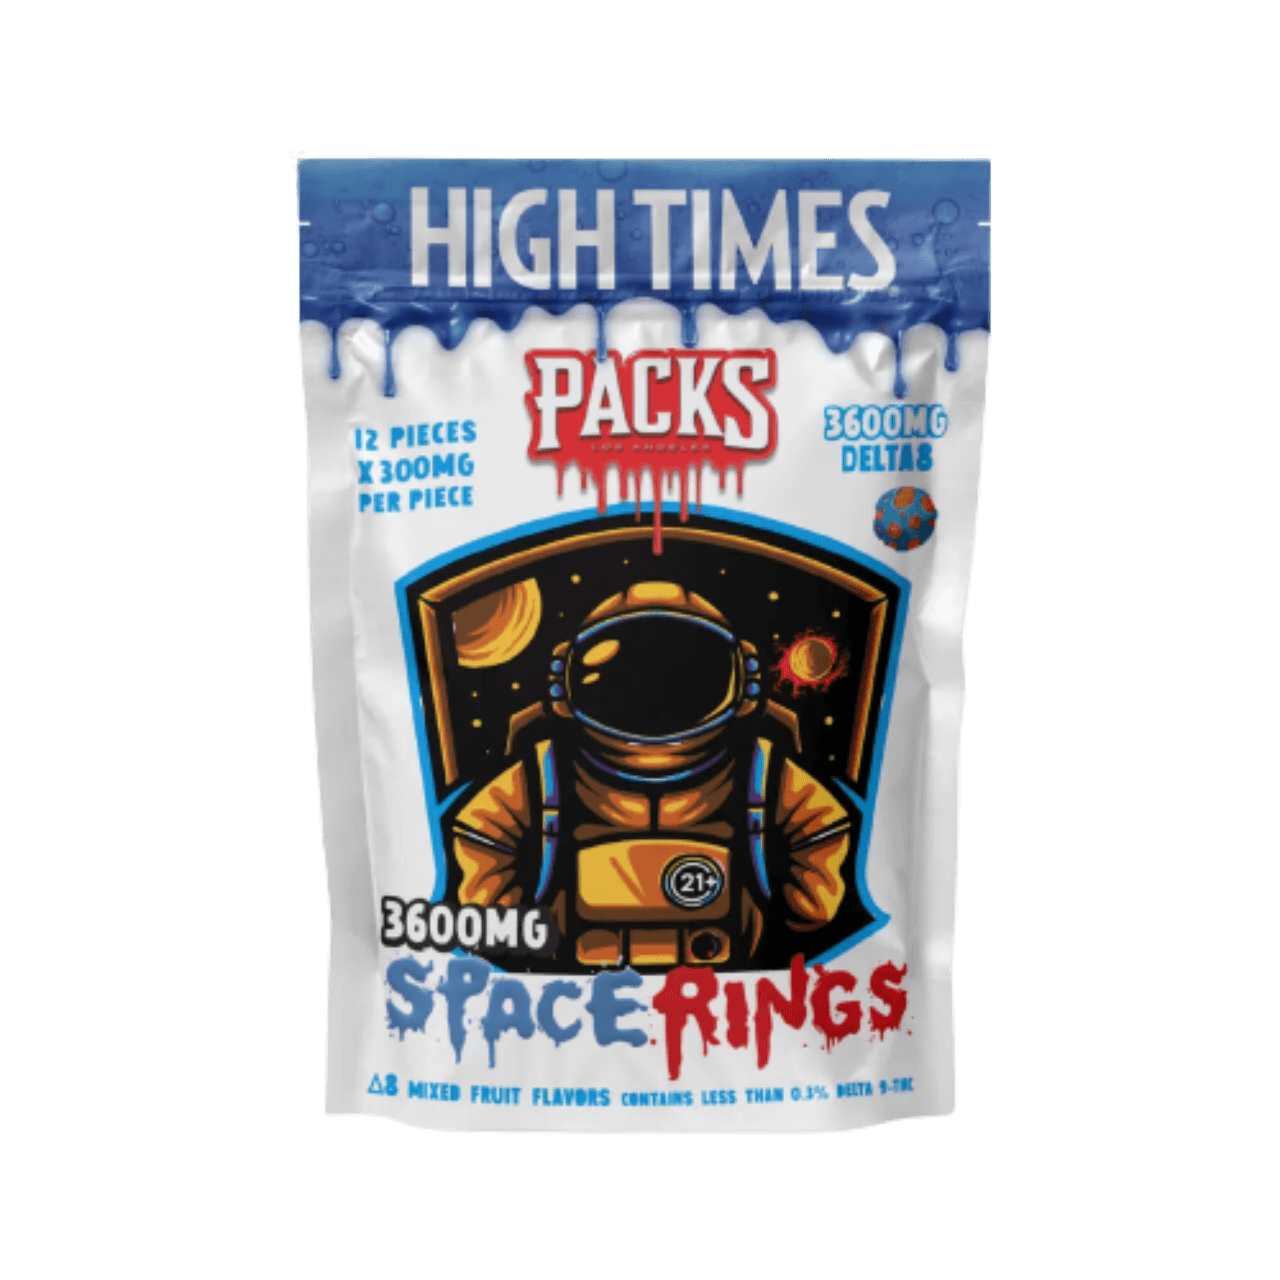 Packs High Times Delta 8 3600MG Mixed Fruit Space Rings -(12 pcs per pack)